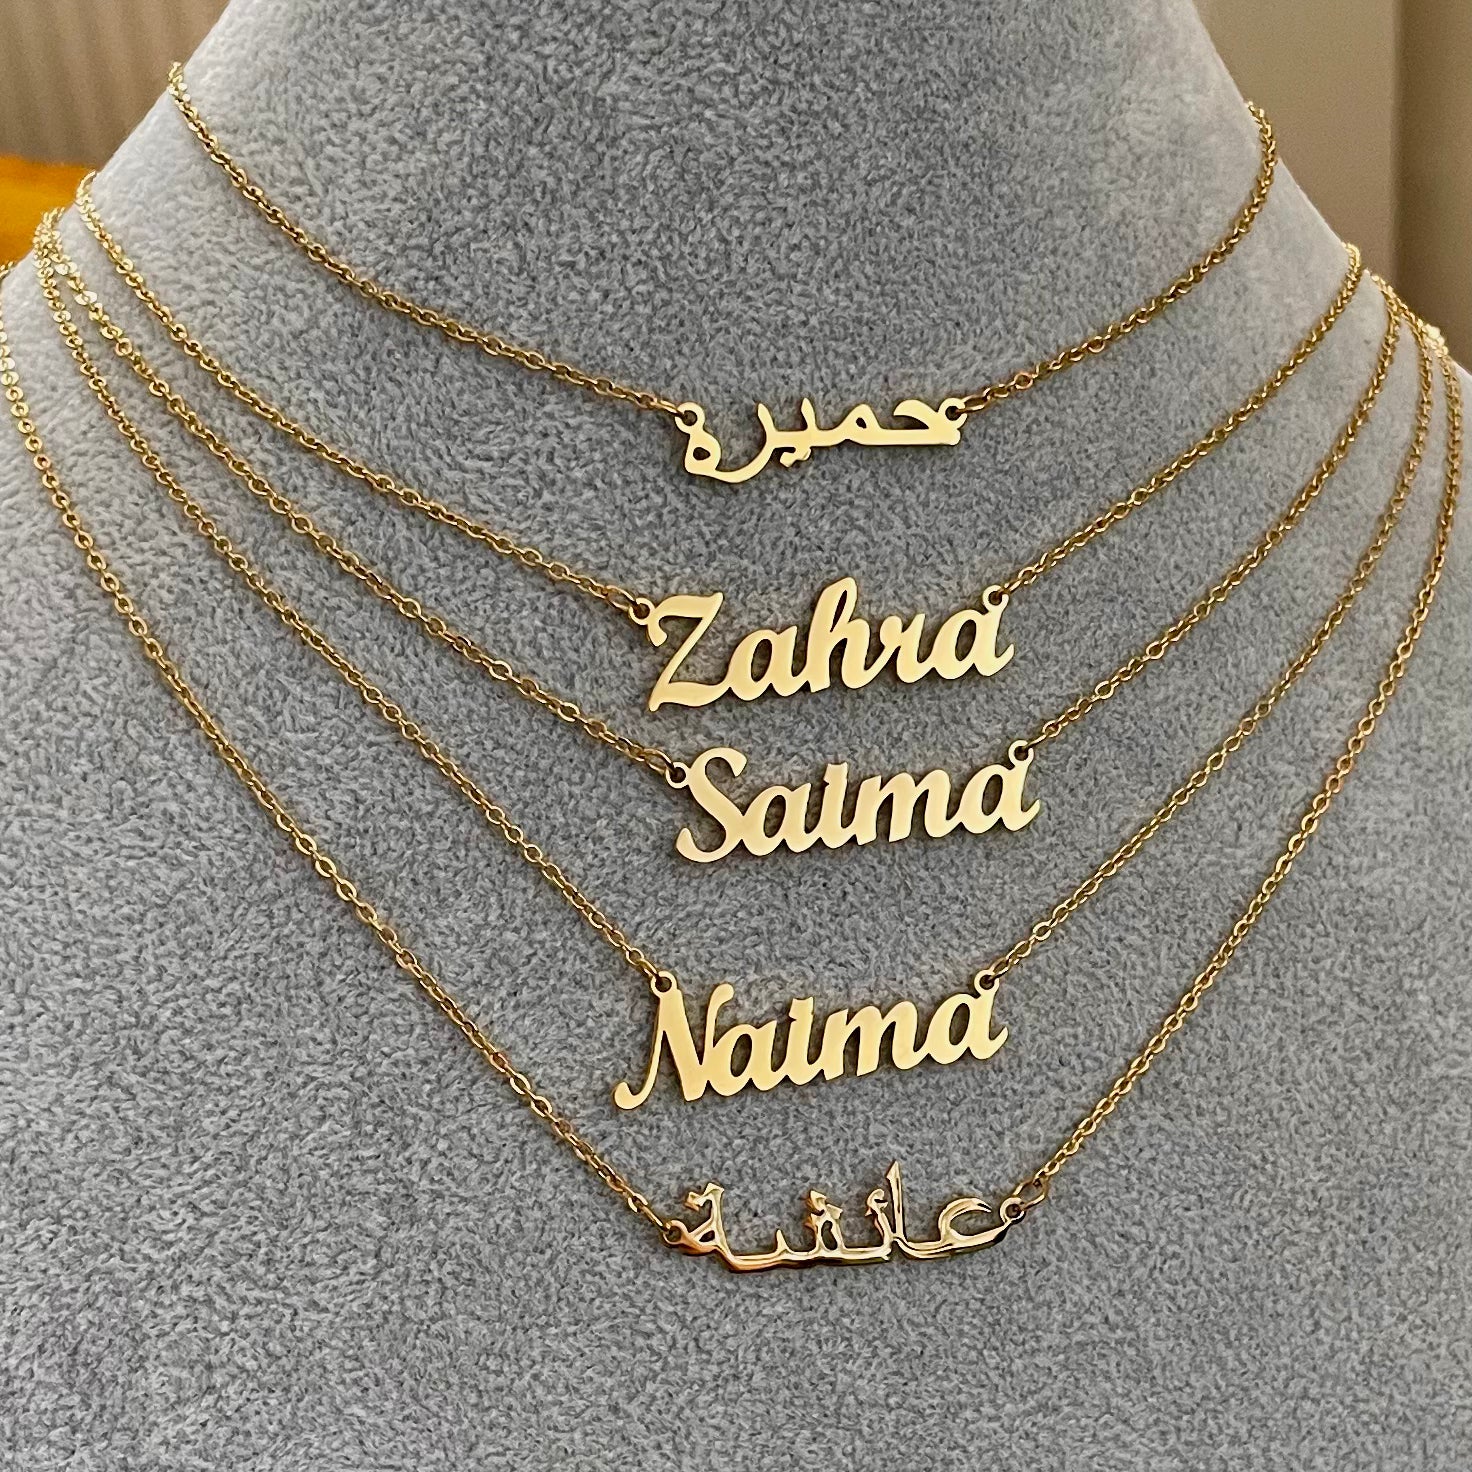 Ready Name Necklaces